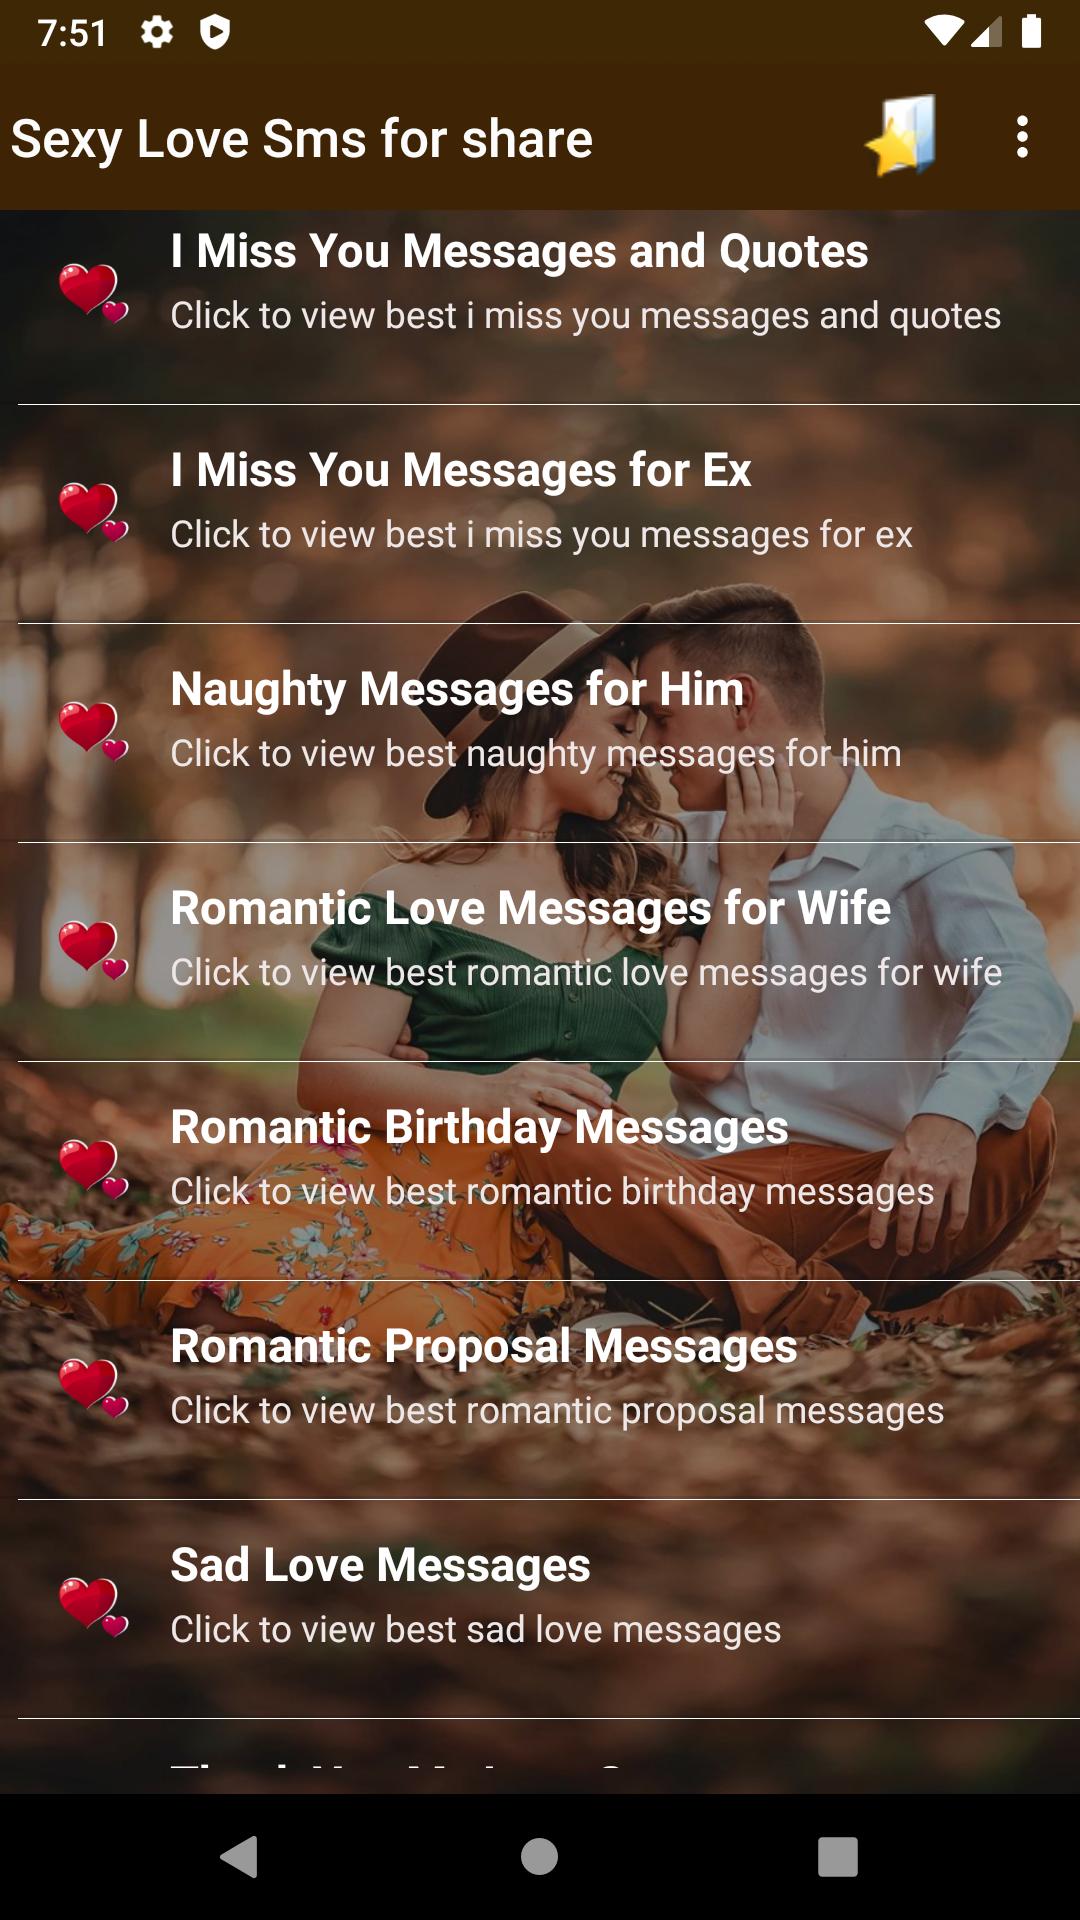 Sexy Love SMS for share for Android - APK Download